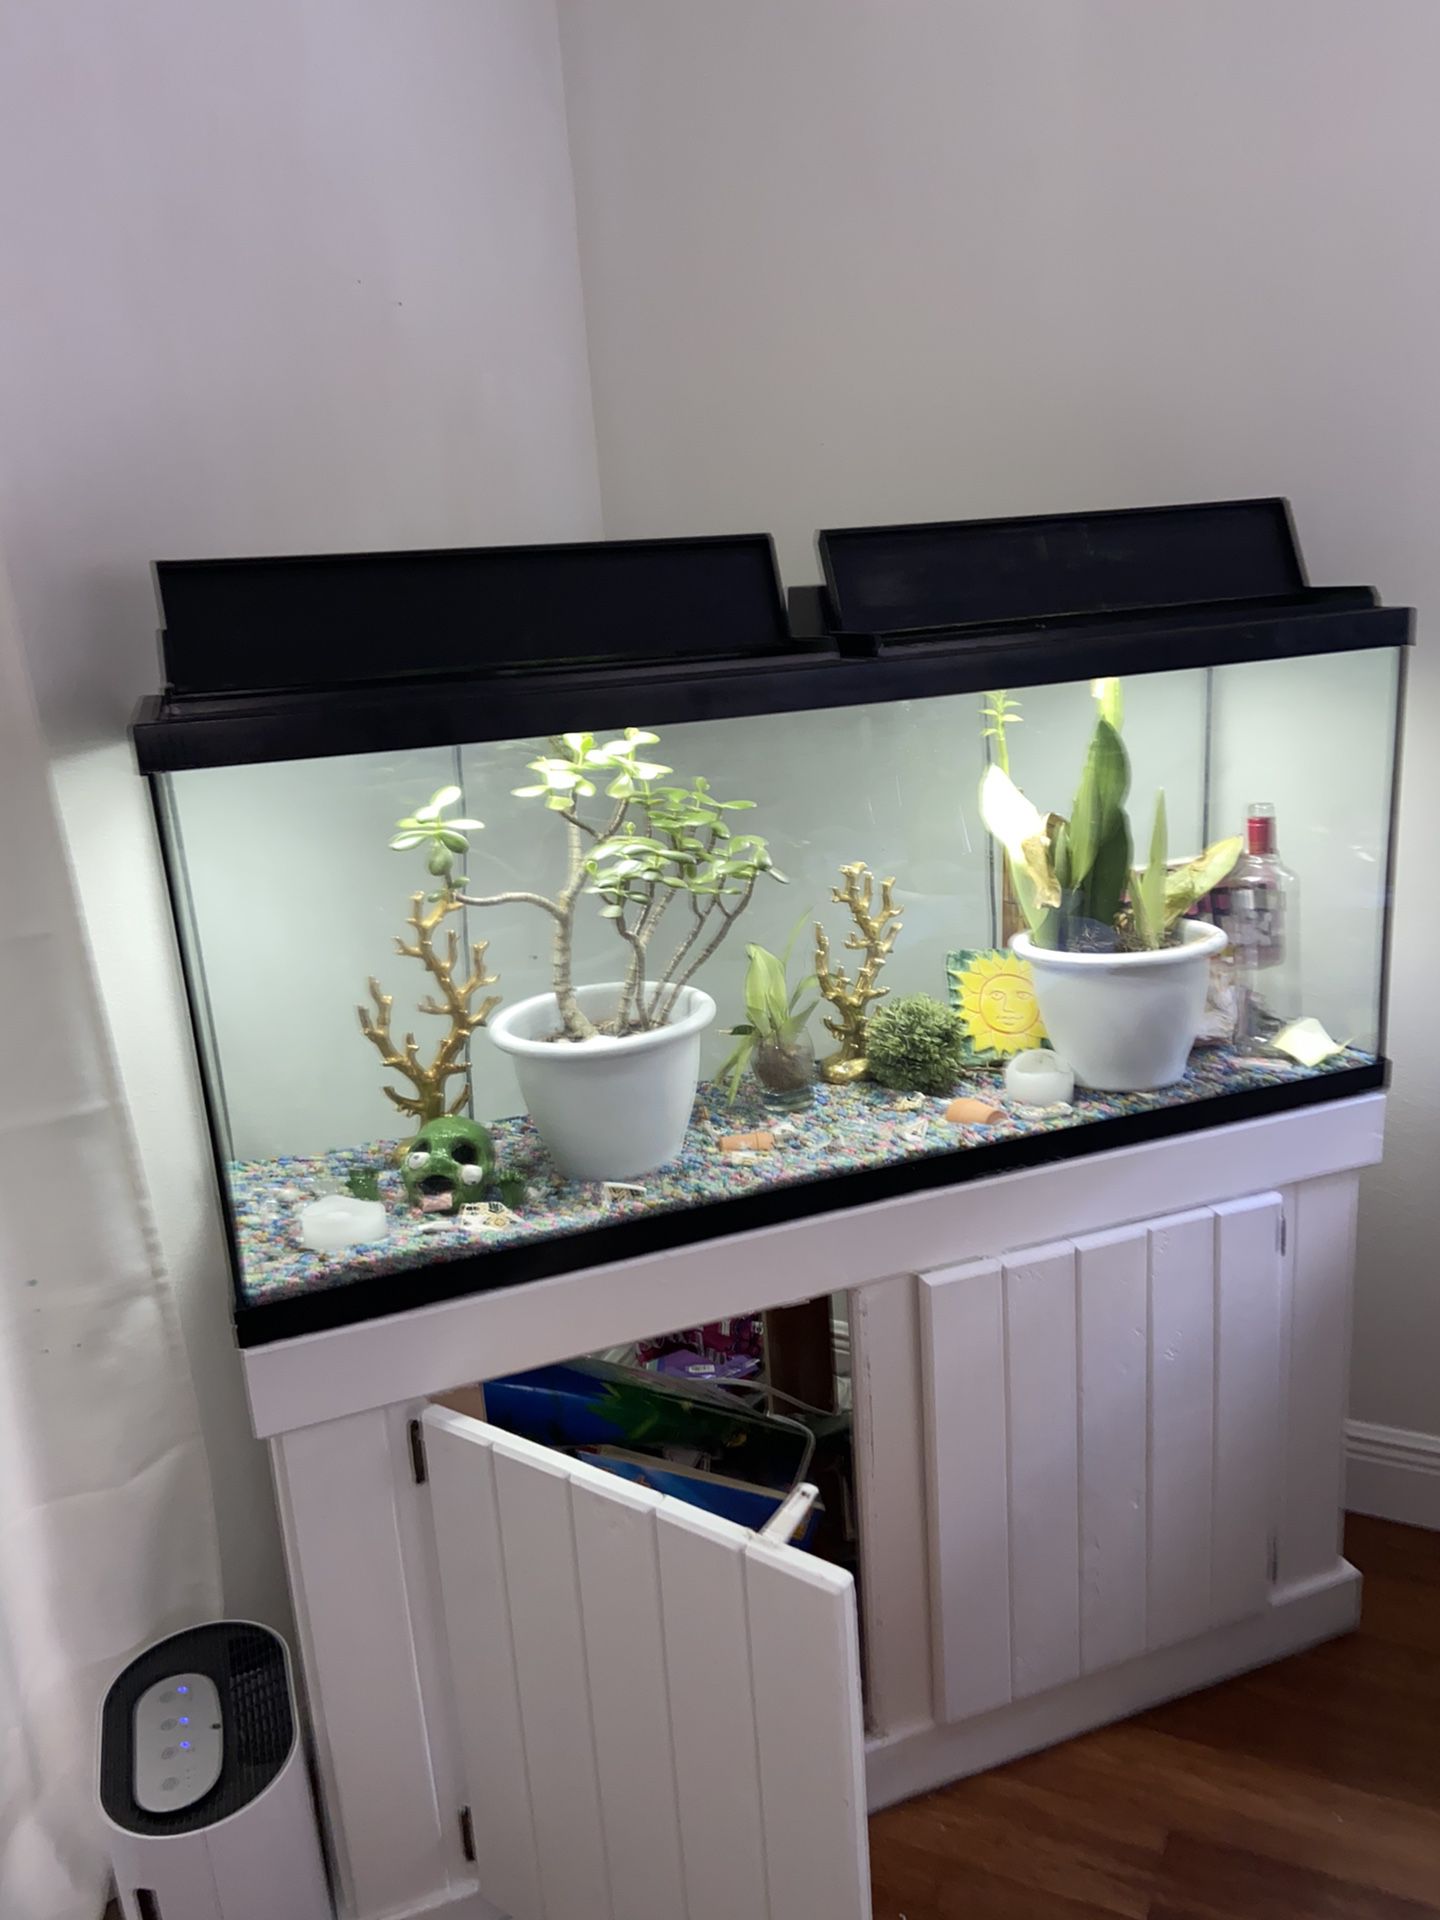 Large fish tank with white wood stand (items shown included)